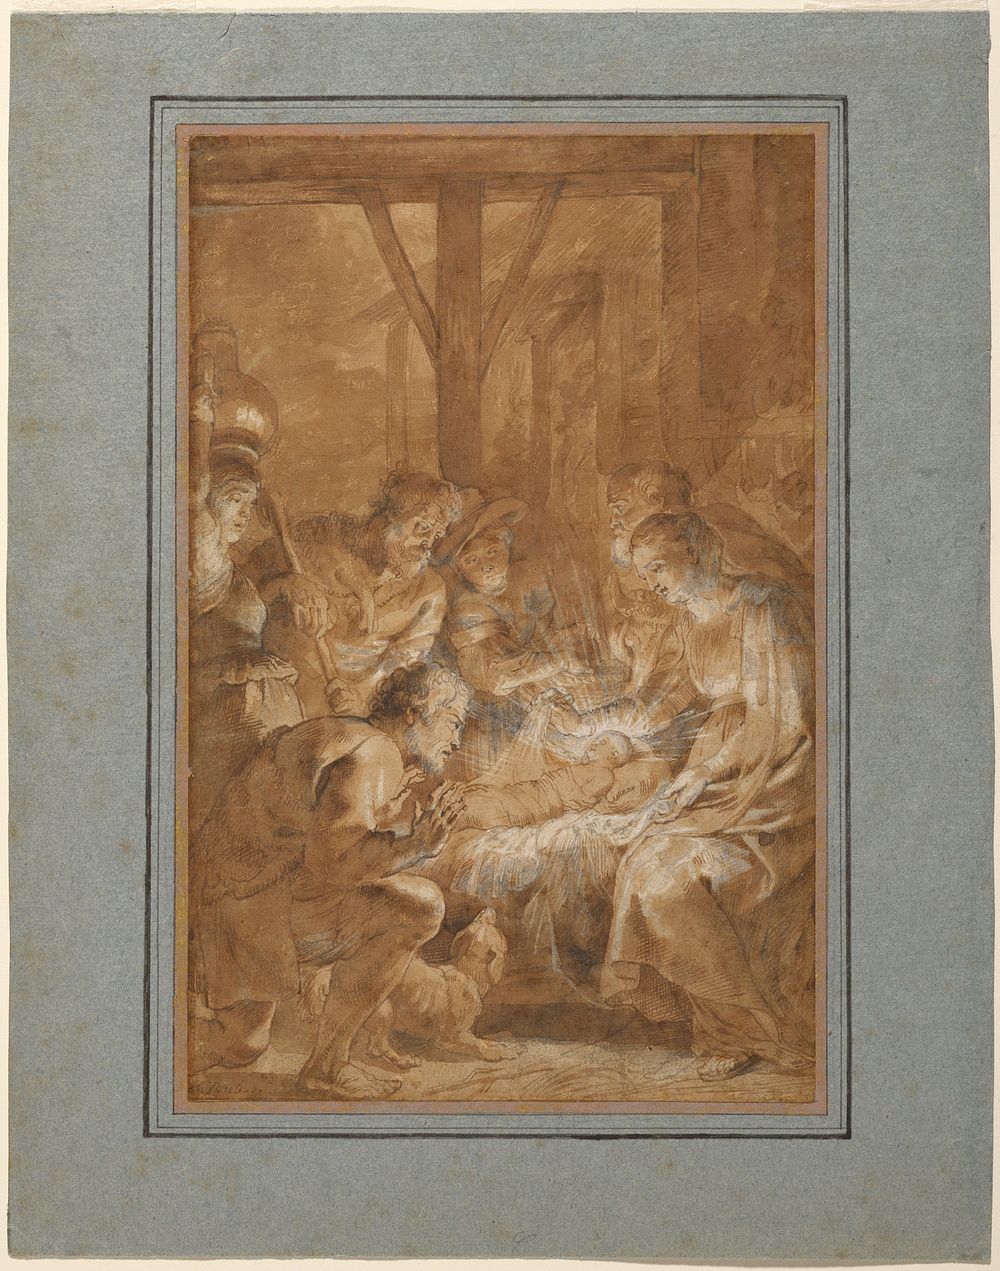 The Adoration of the Shepherds by Peter Paul Rubens